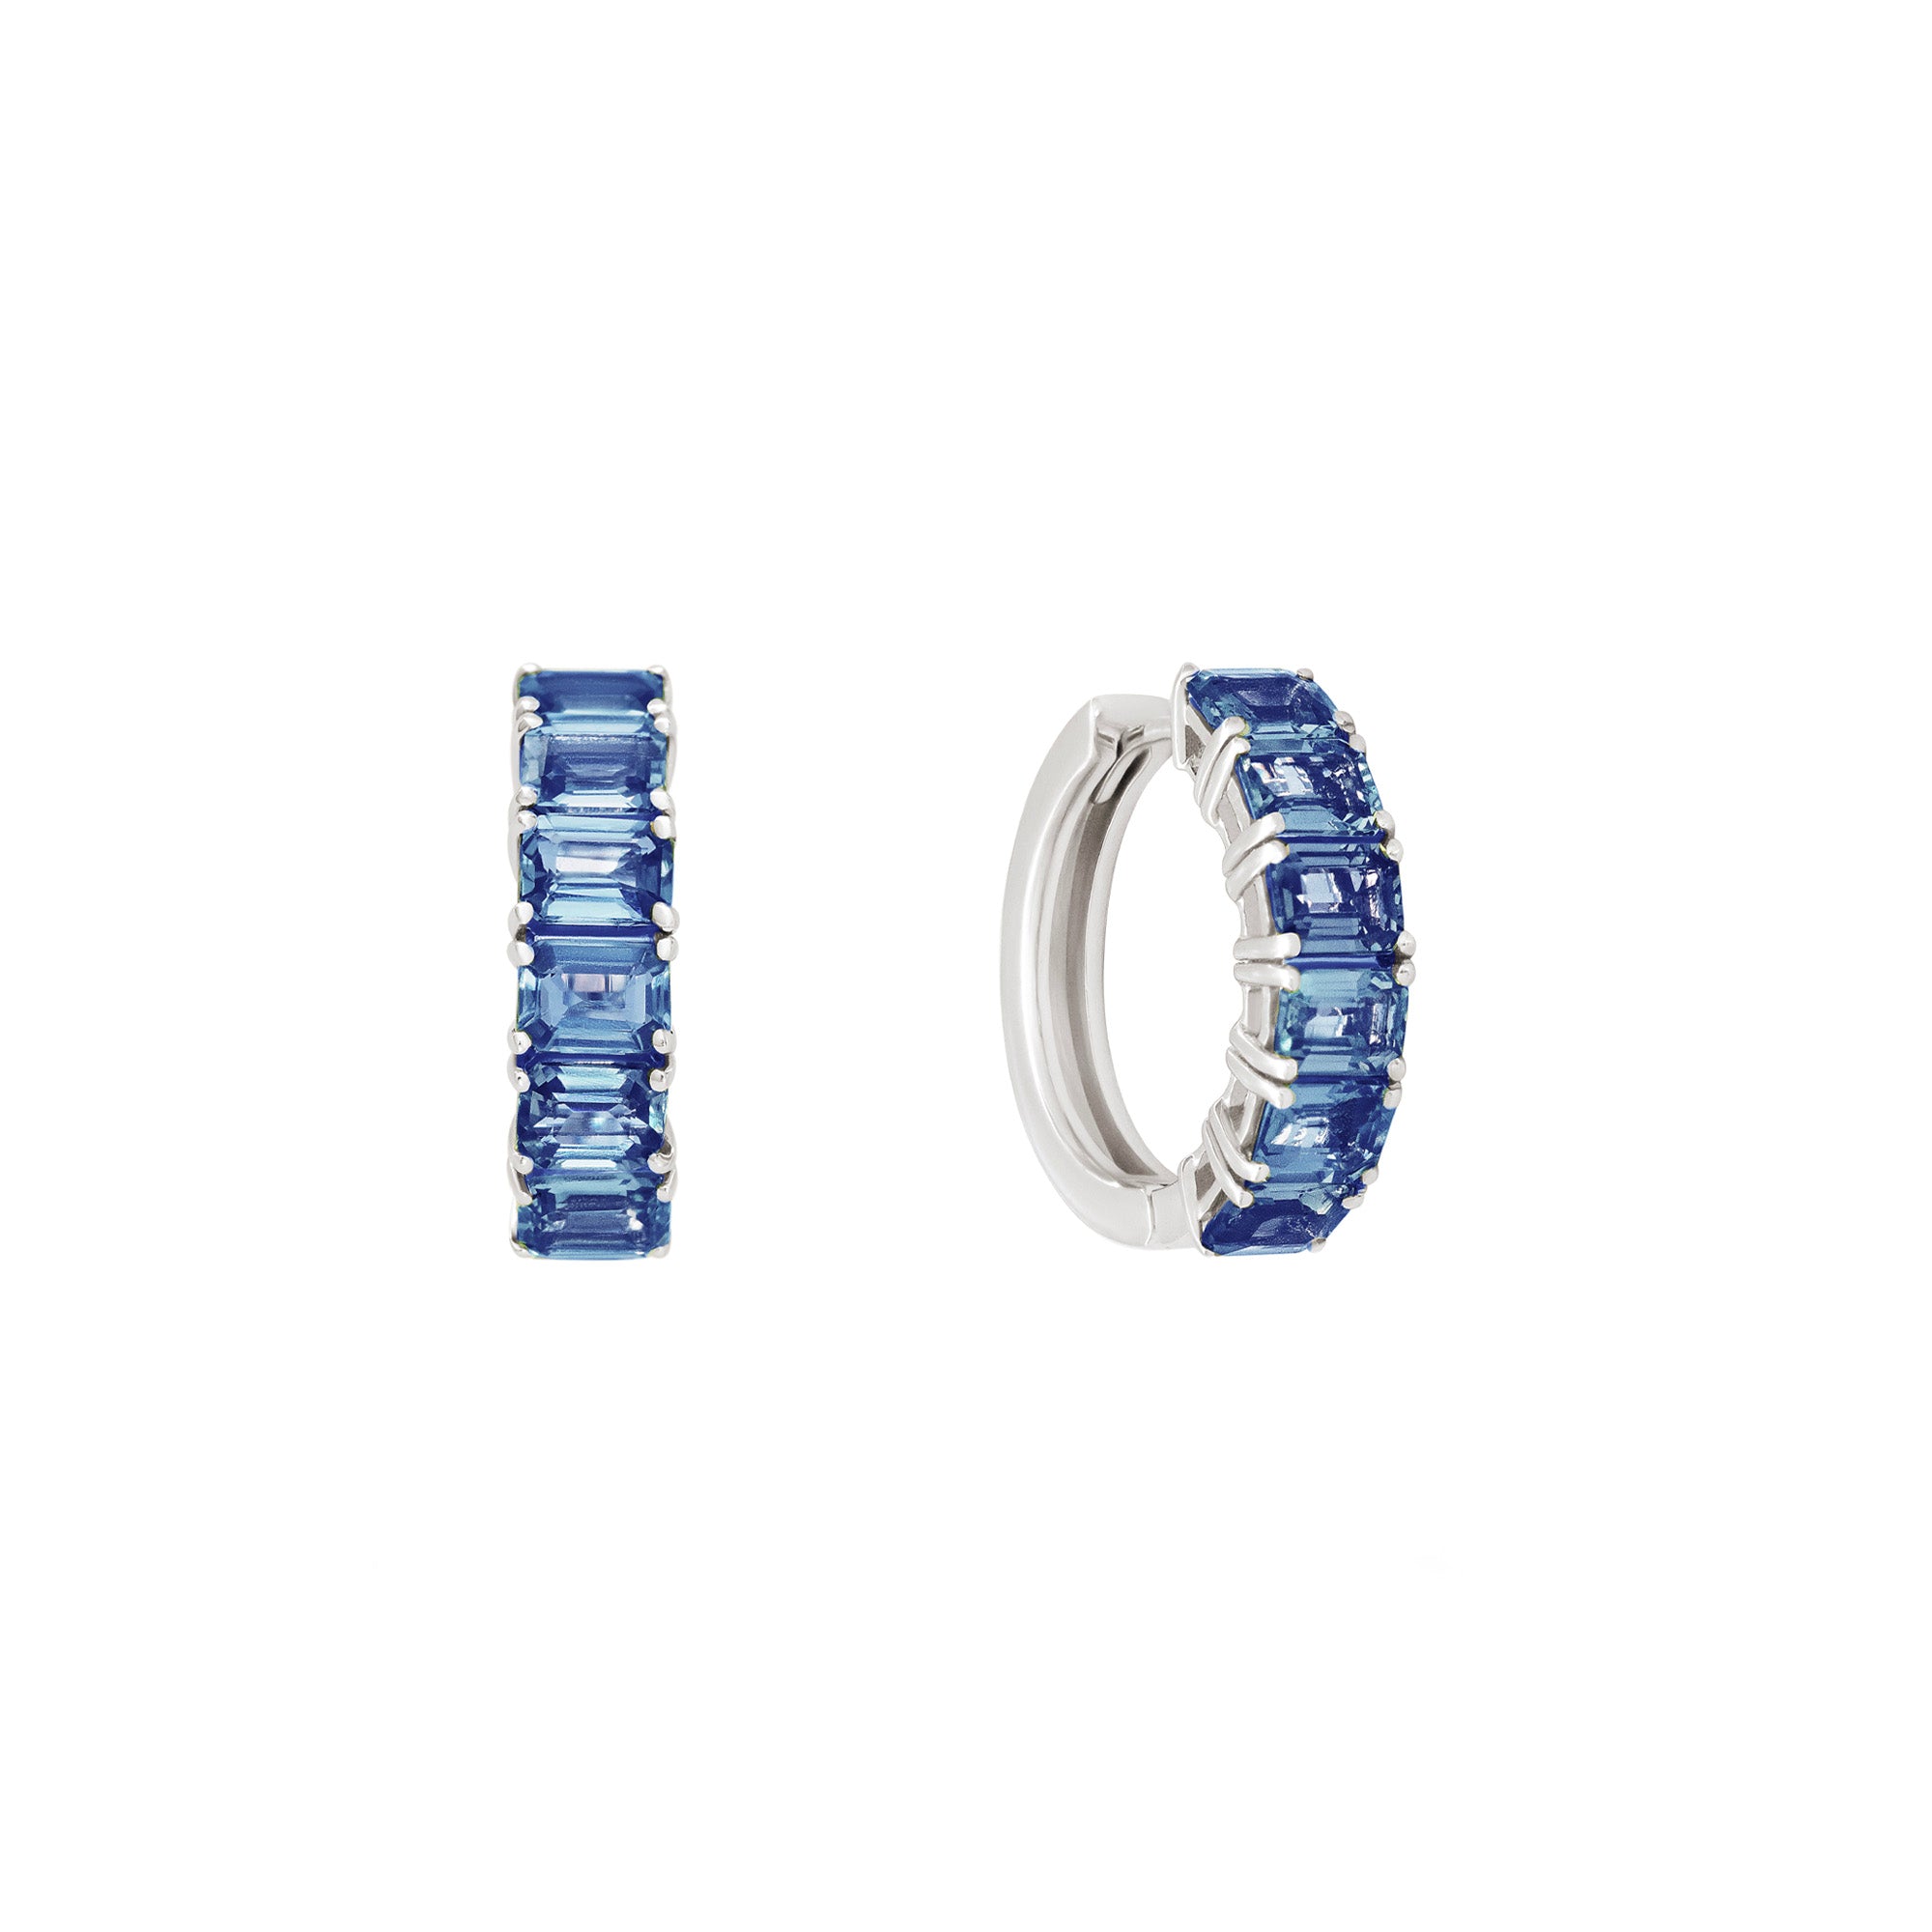 Pace White Gold Earrings With Sapphires